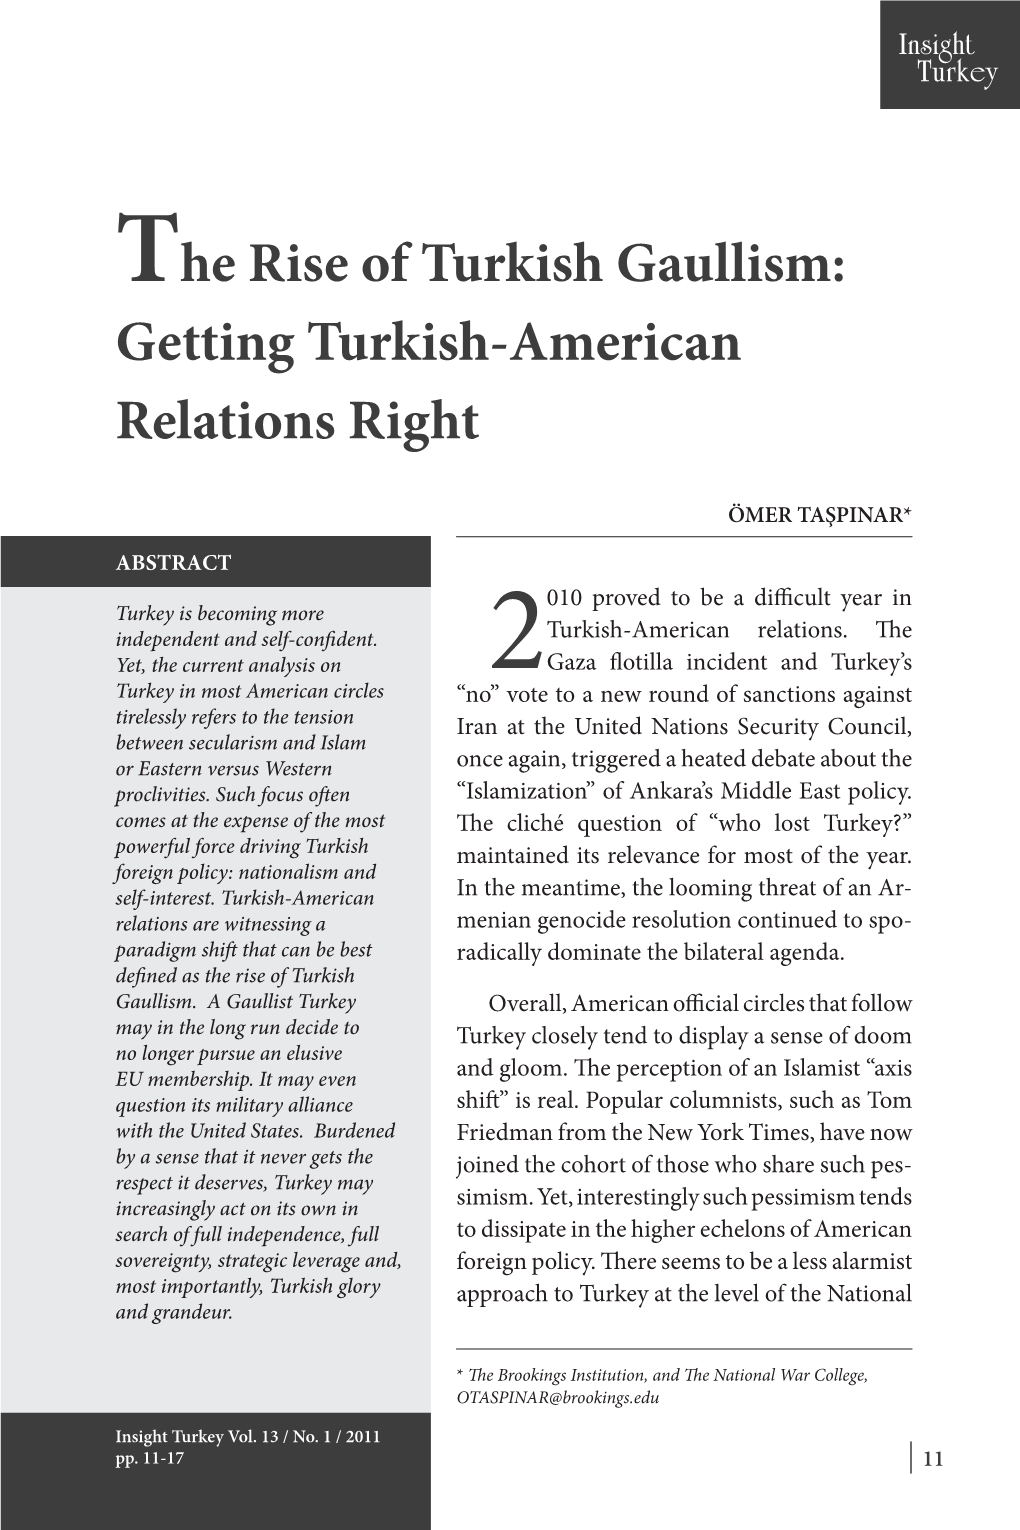 The Rise of Turkish Gaullism: Getting Turkish-American Relations Right